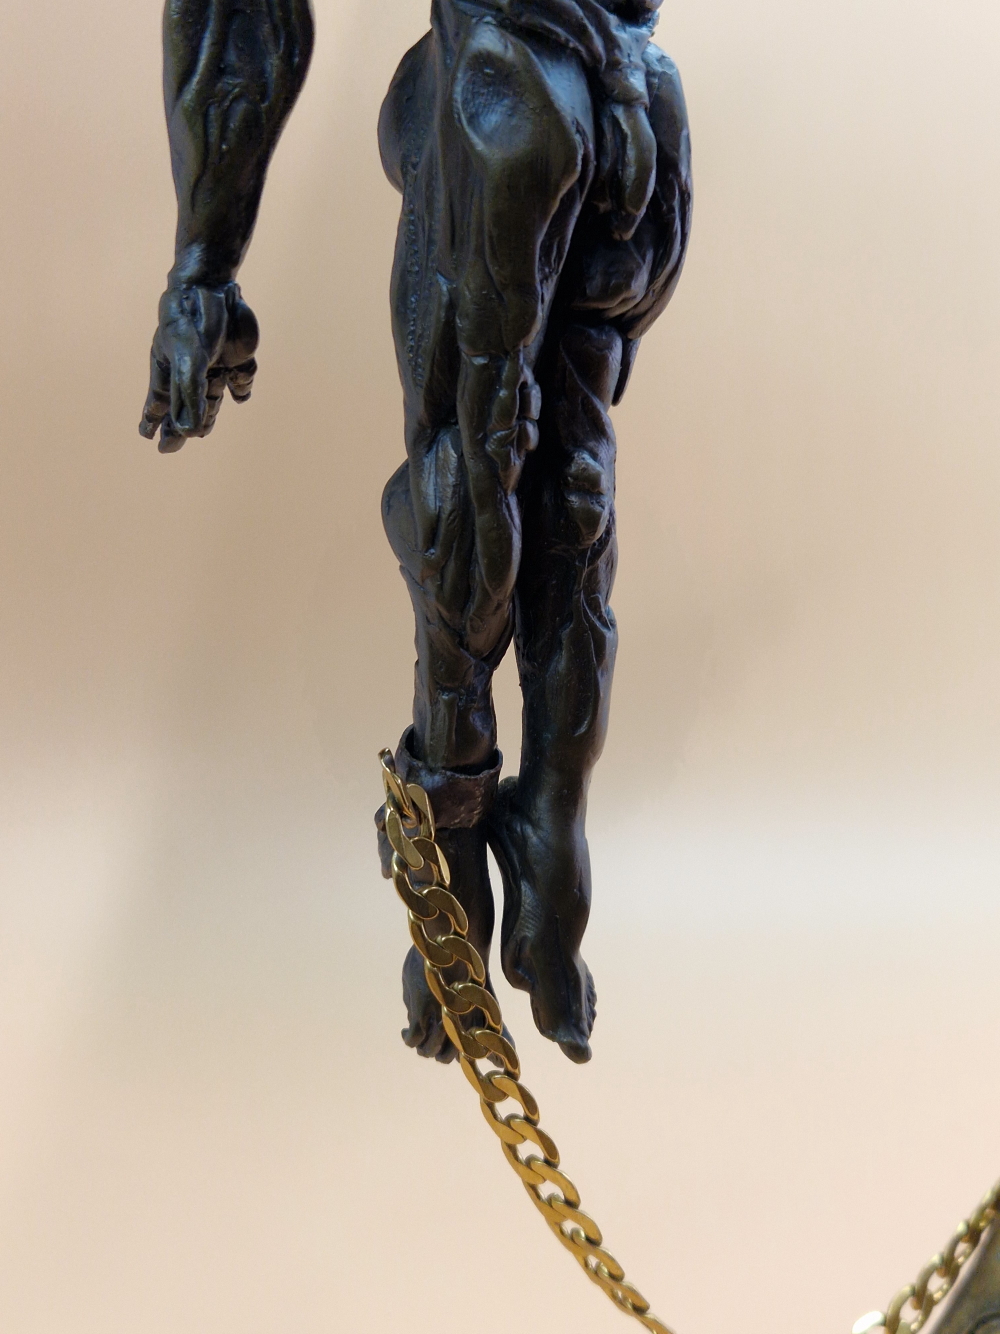 FELIPE GONZALEZ, A CONTEMPORARY BRONZE FIGURE OF A NAKED DIVER, A MANACLE ON HIS LEFT WRIST - Image 4 of 8